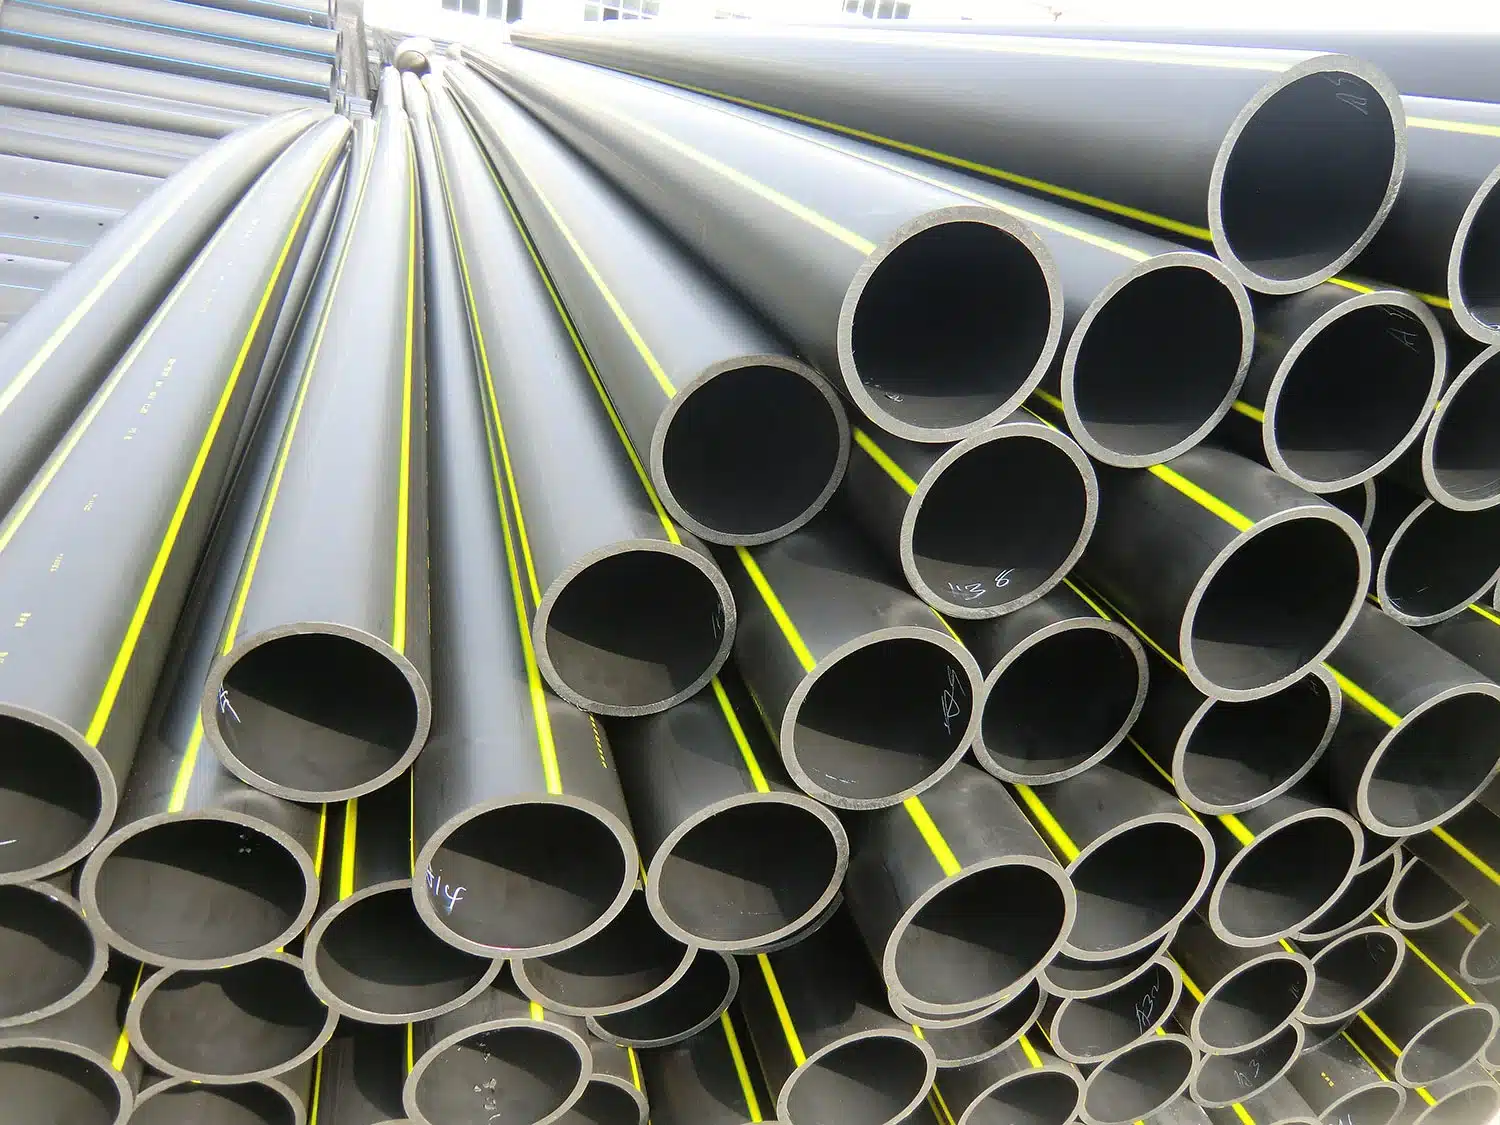 HDPE pipe & fittings